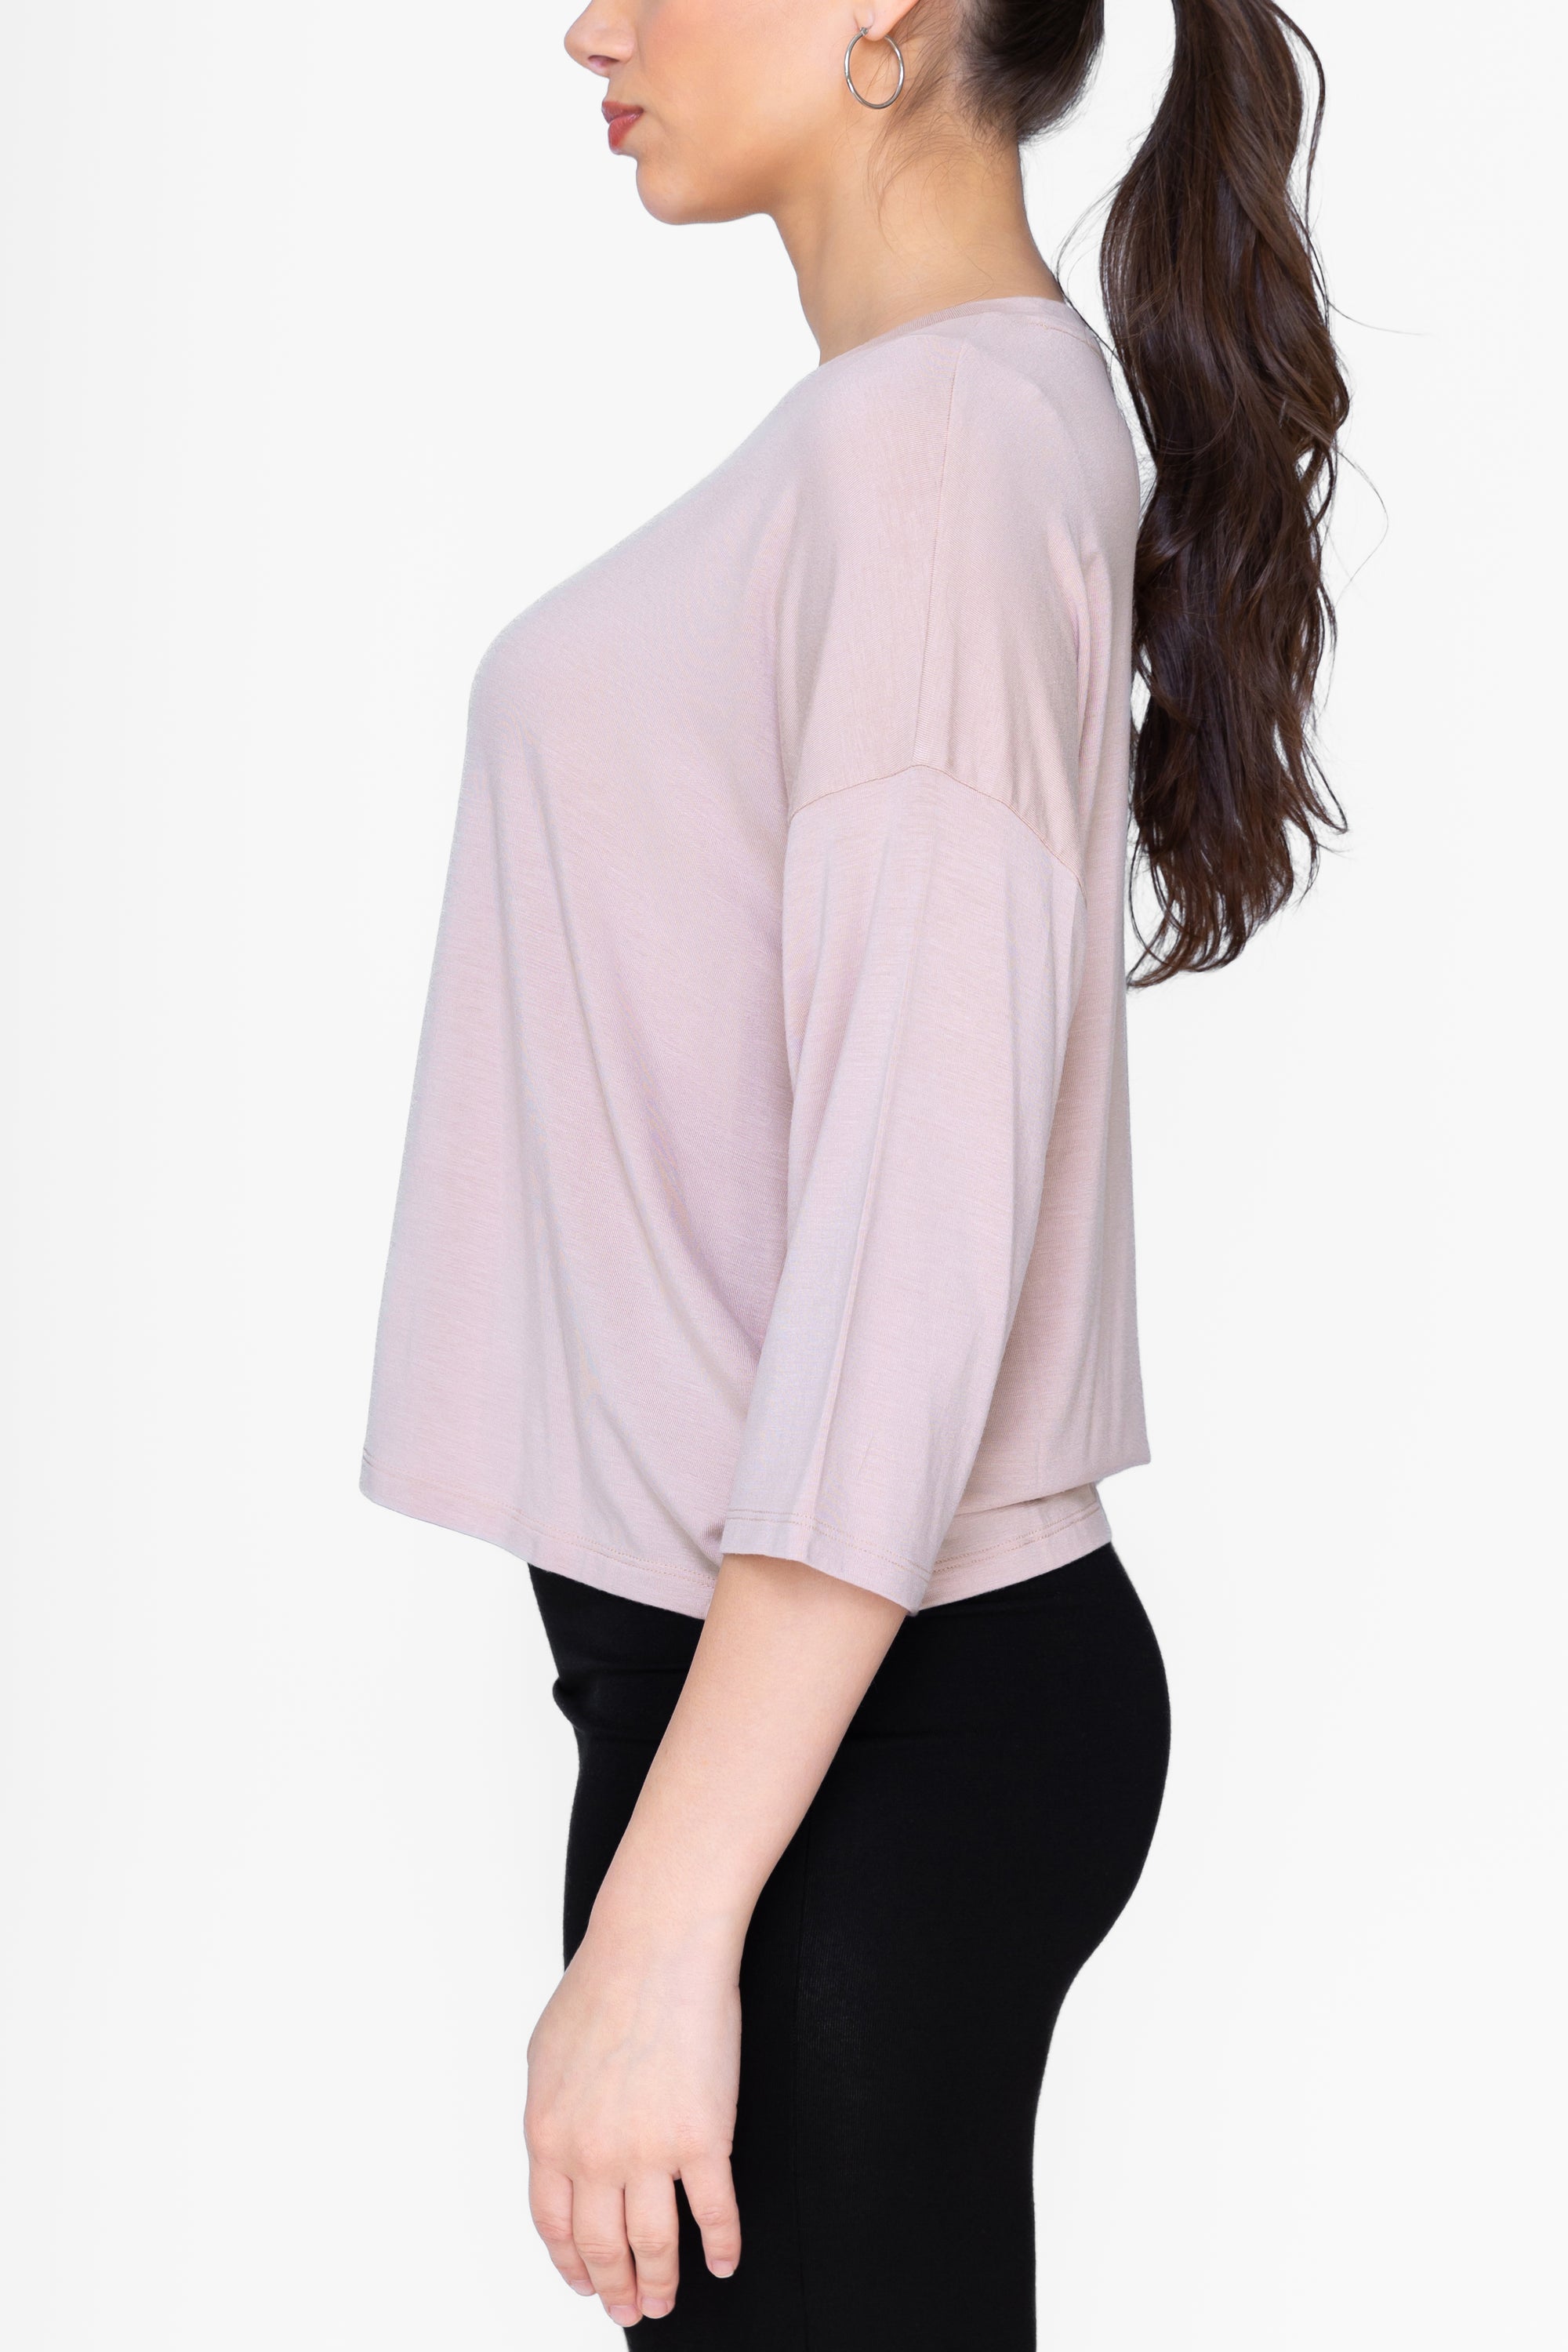 BOXY 3/4 TEE CROPPED (TAUPE)